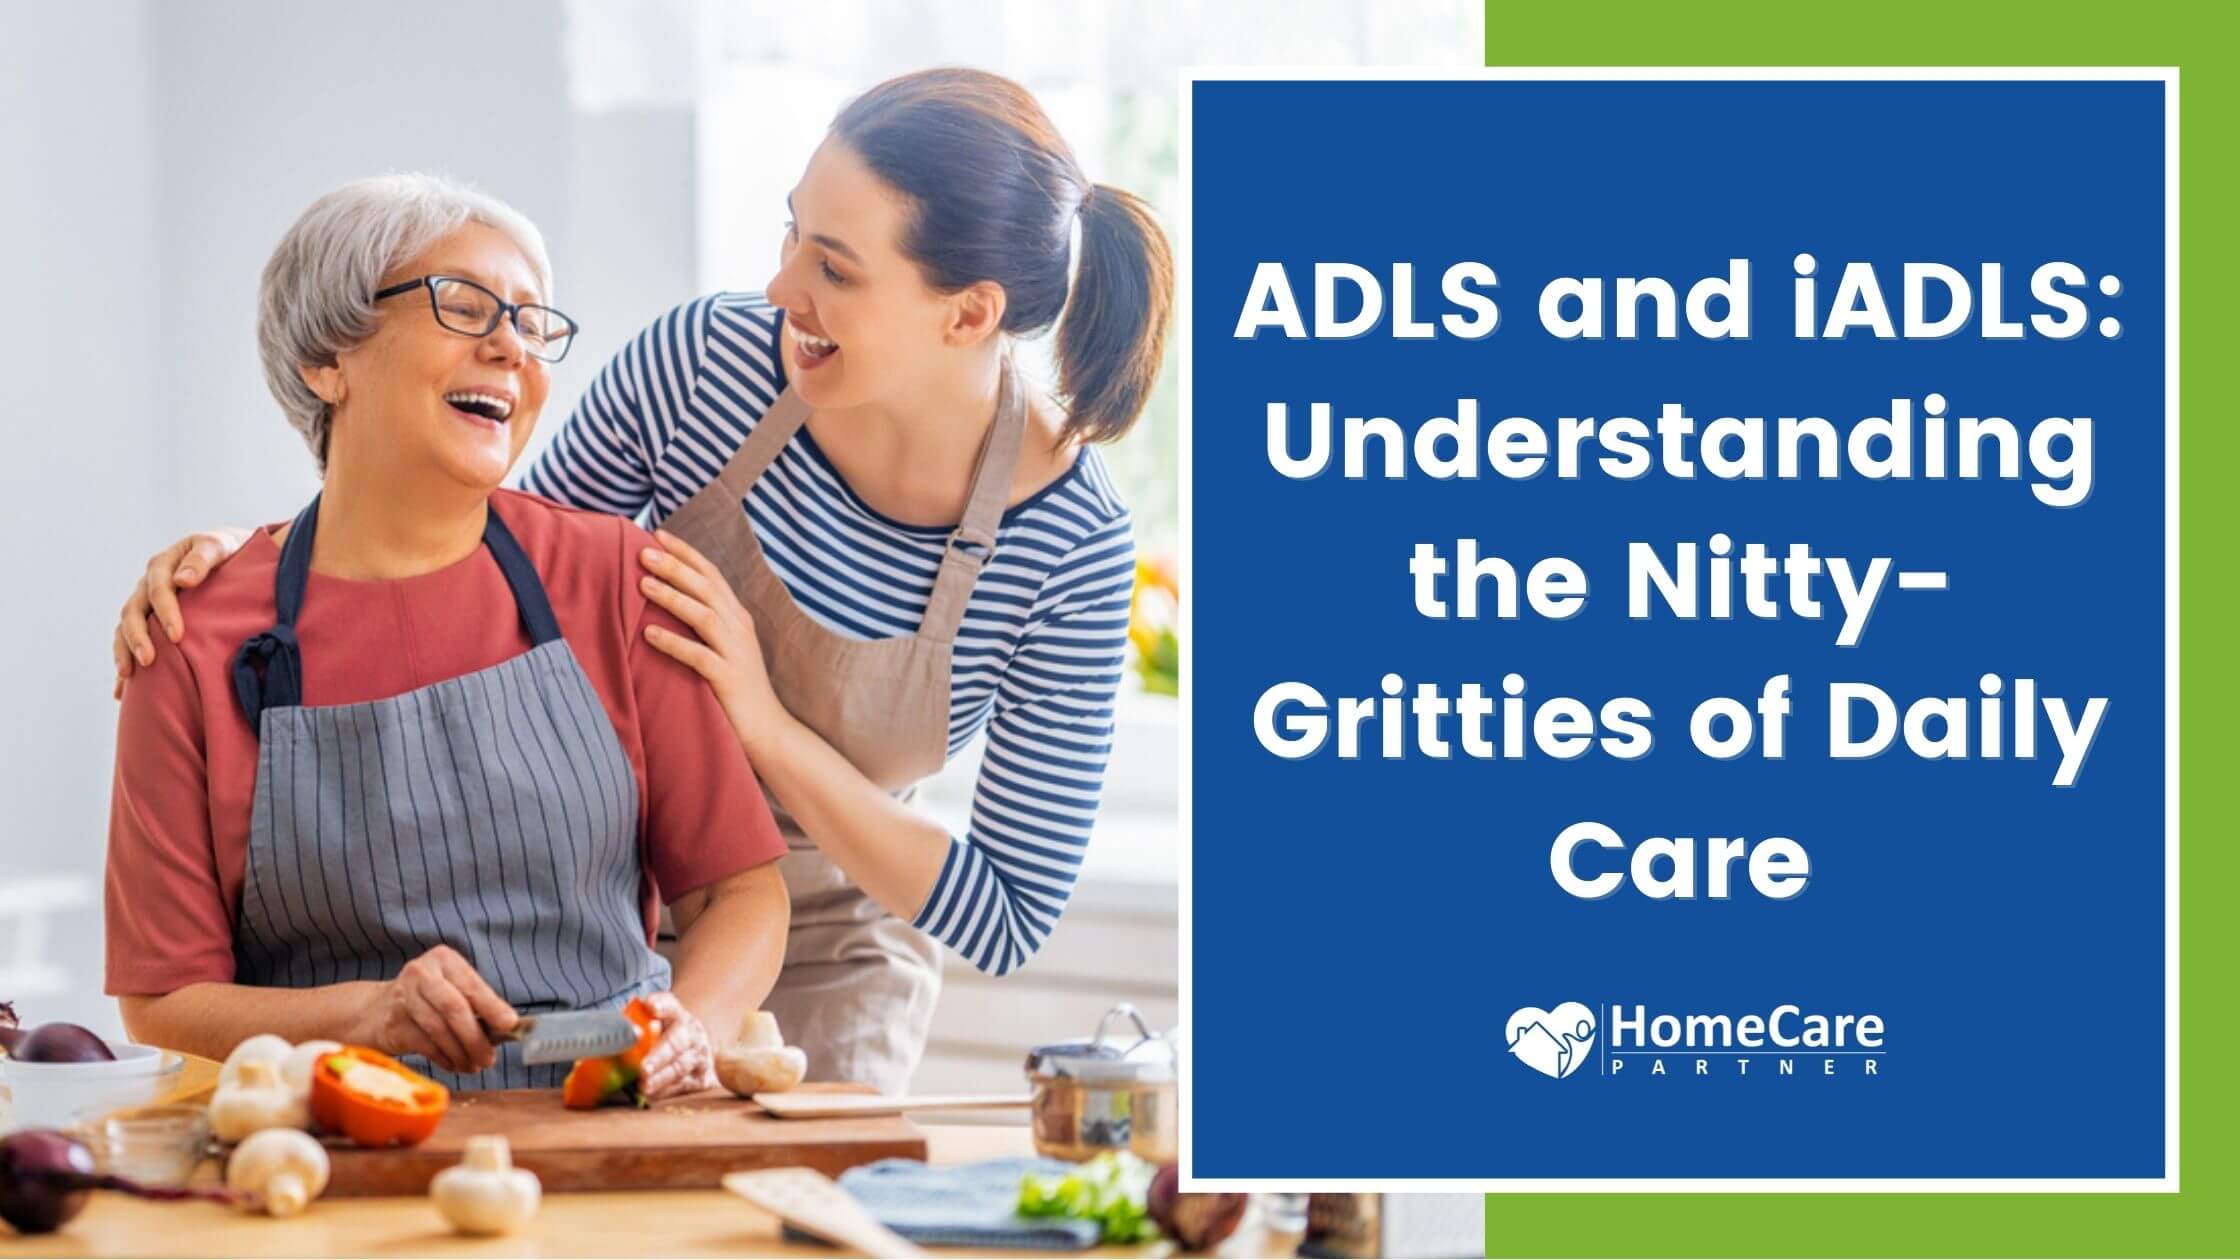 ADLS and iADLS: Understanding the Nitty-Gritties of Daily Care